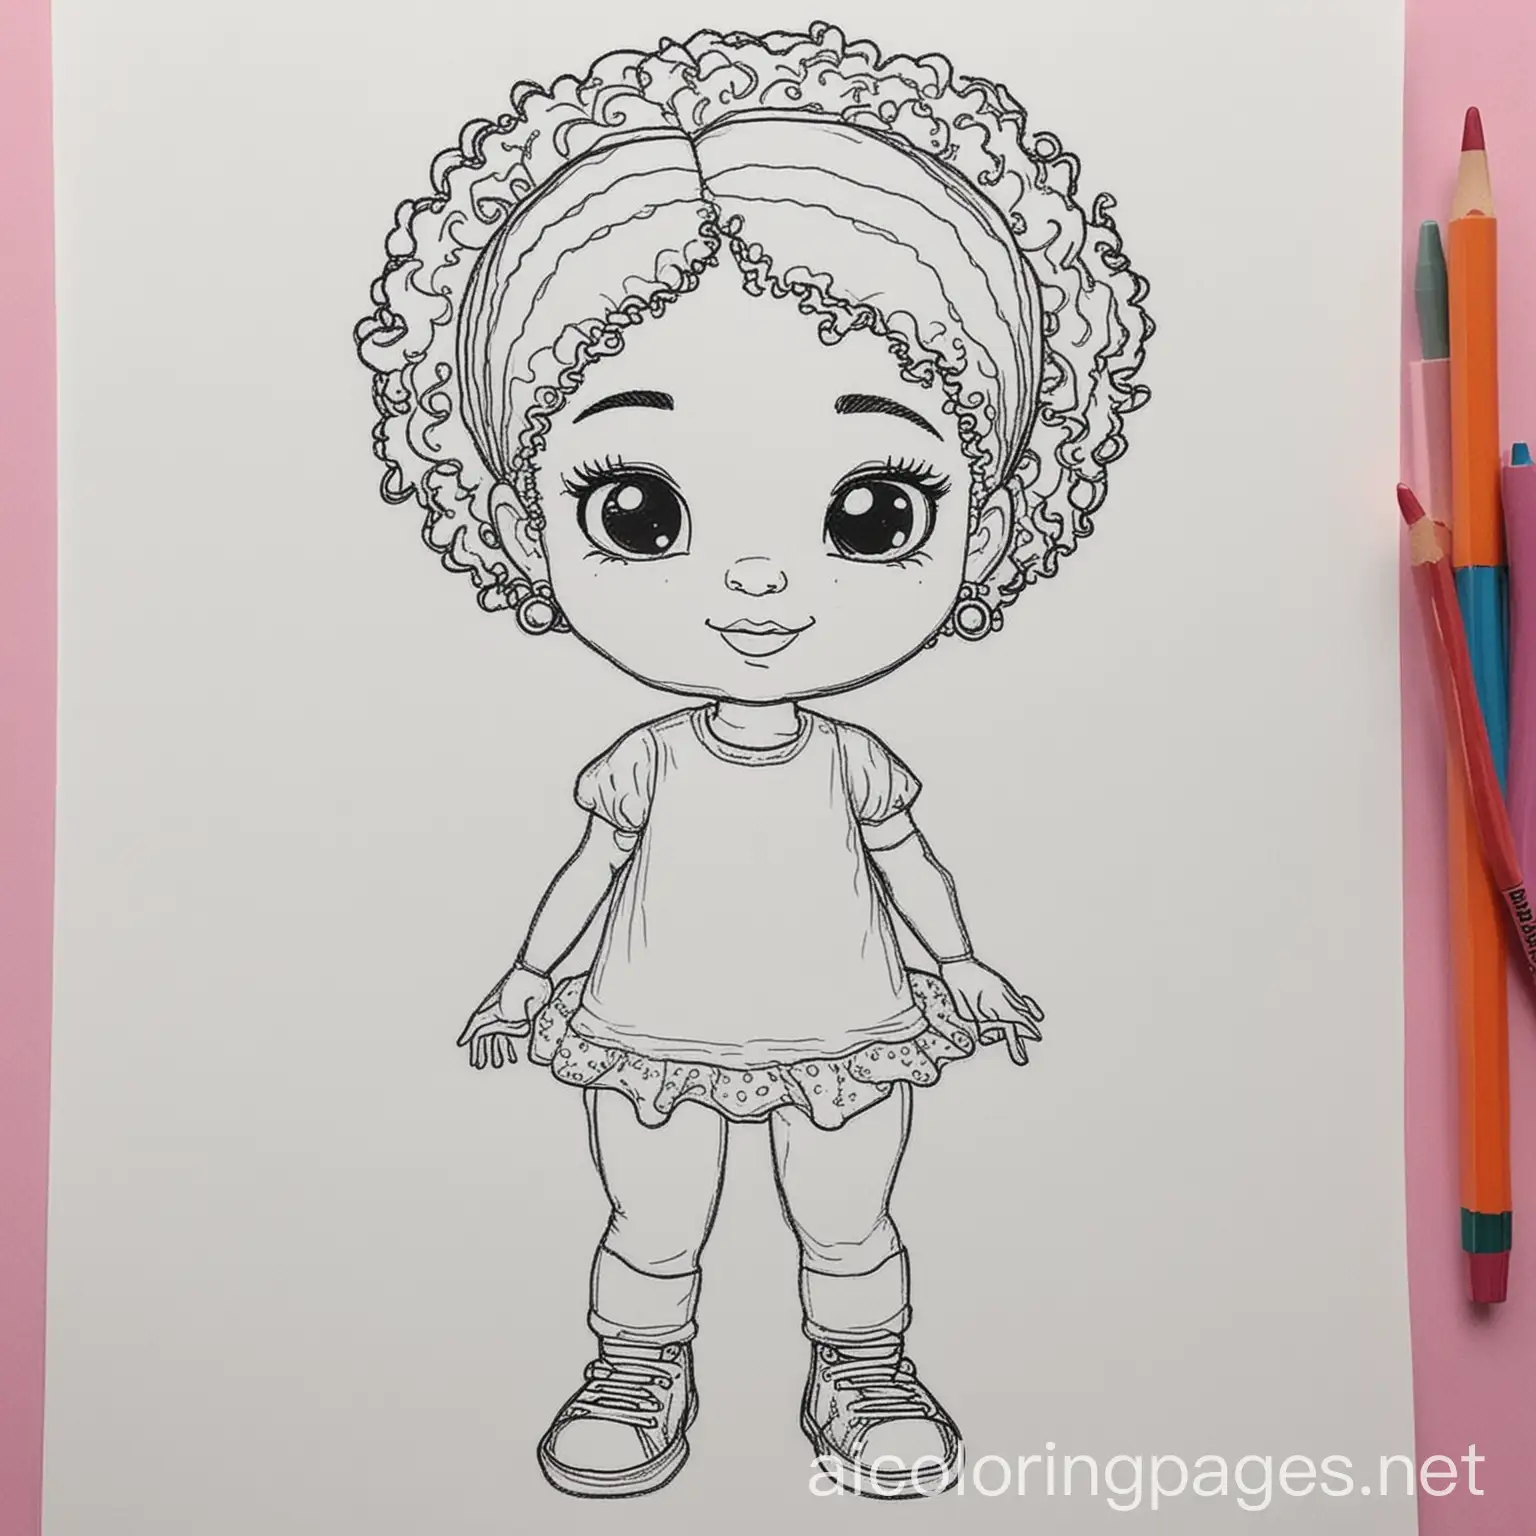 little black girls, Coloring Page, black and white, line art, white background, Simplicity, Ample White Space. The background of the coloring page is plain white to make it easy for young children to color within the lines. The outlines of all the subjects are easy to distinguish, making it simple for kids to color without too much difficulty